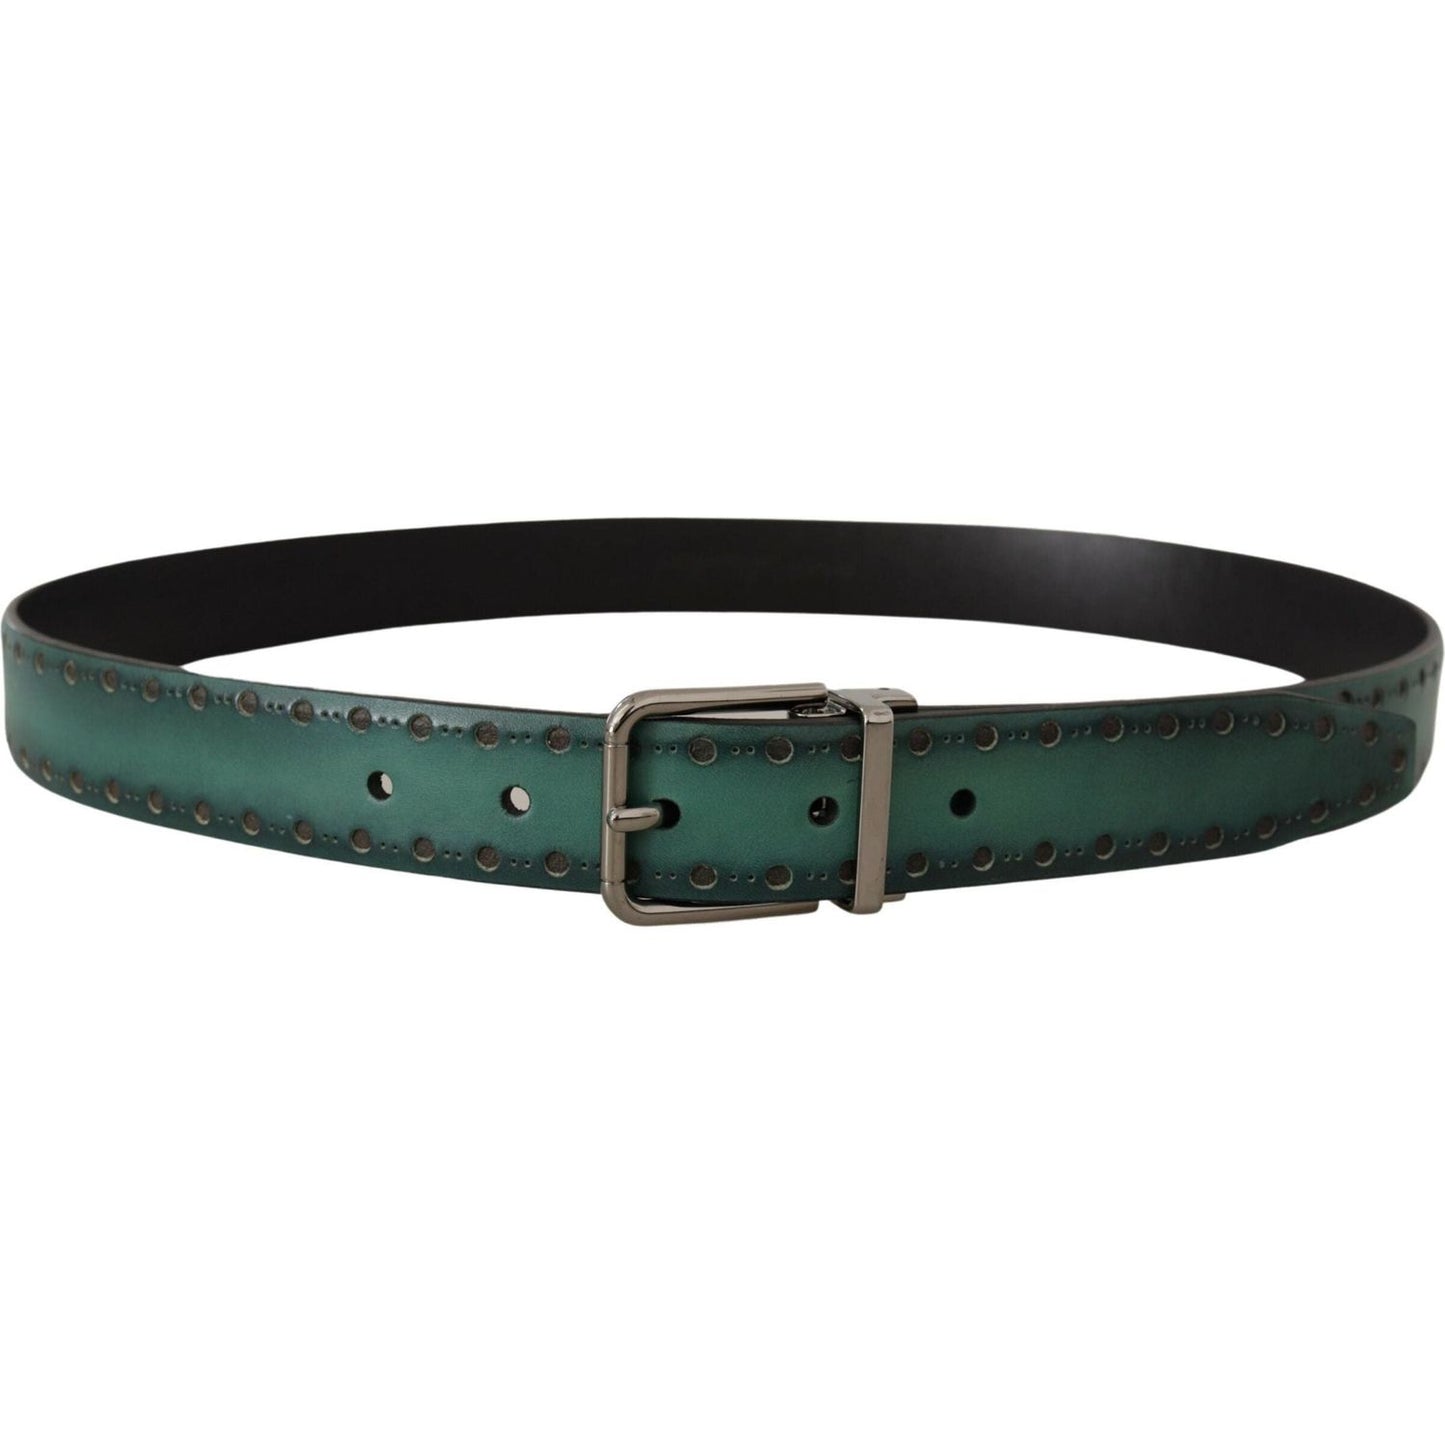 Dolce & Gabbana Elegant Leather Belt with Silver Tone Buckle green-giotto-leather-silver-metal-buckle-belt